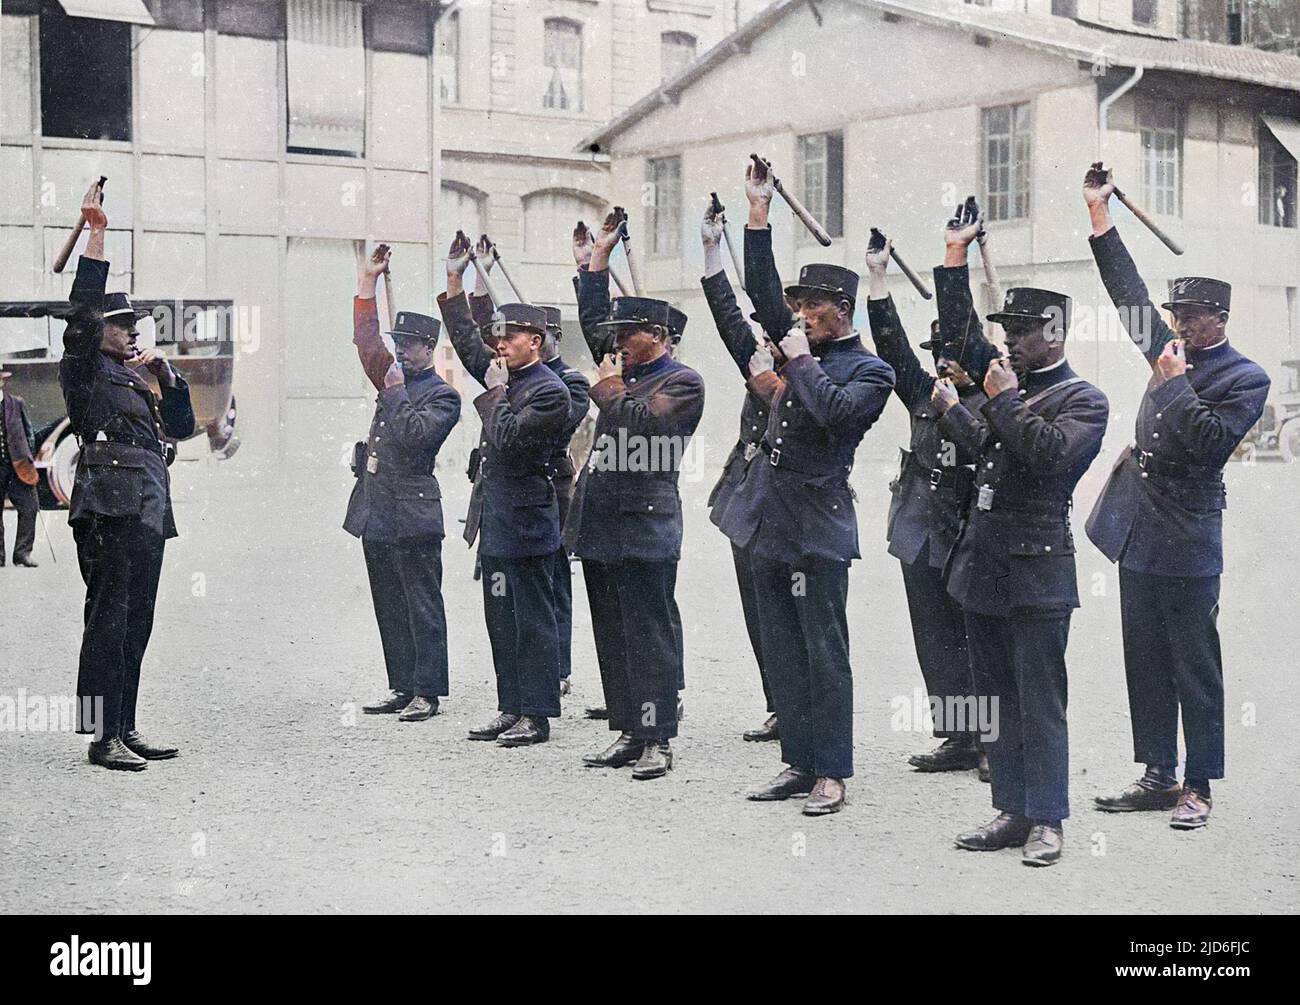 French police cadets saluting and blowing whistles during a training session. Colourised version of : 10165072       Date: early 1930s Stock Photo